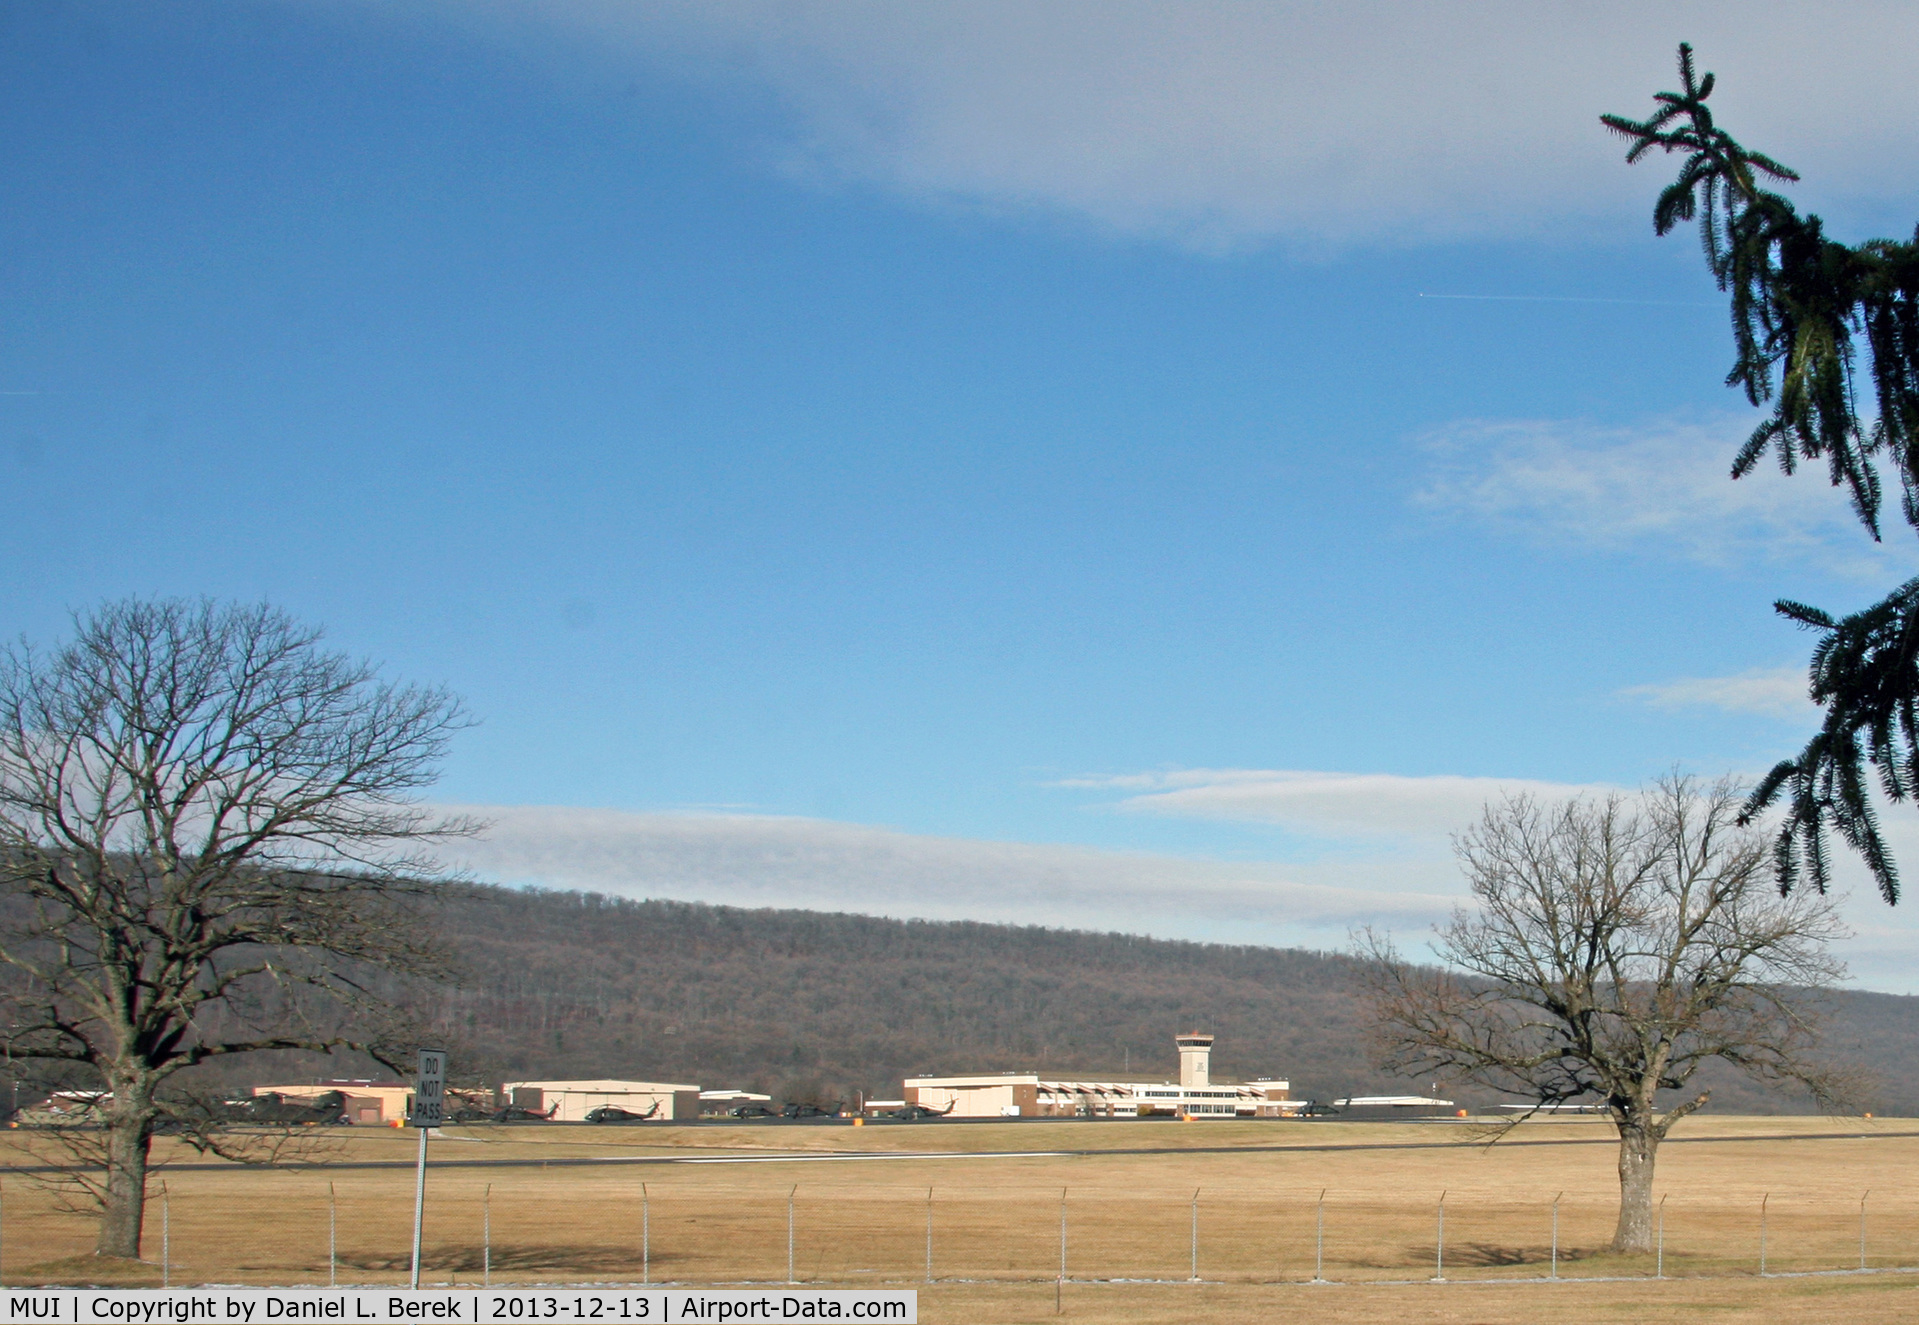 Muir Aaf (fort Indiantown Gap) Airport (MUI) - This U.S. Army field serves Fort Indiantown Gap; it is adjacent to the Pennsylvania National Guard Military Museum and numerous veterans monuments and cemeteries. 